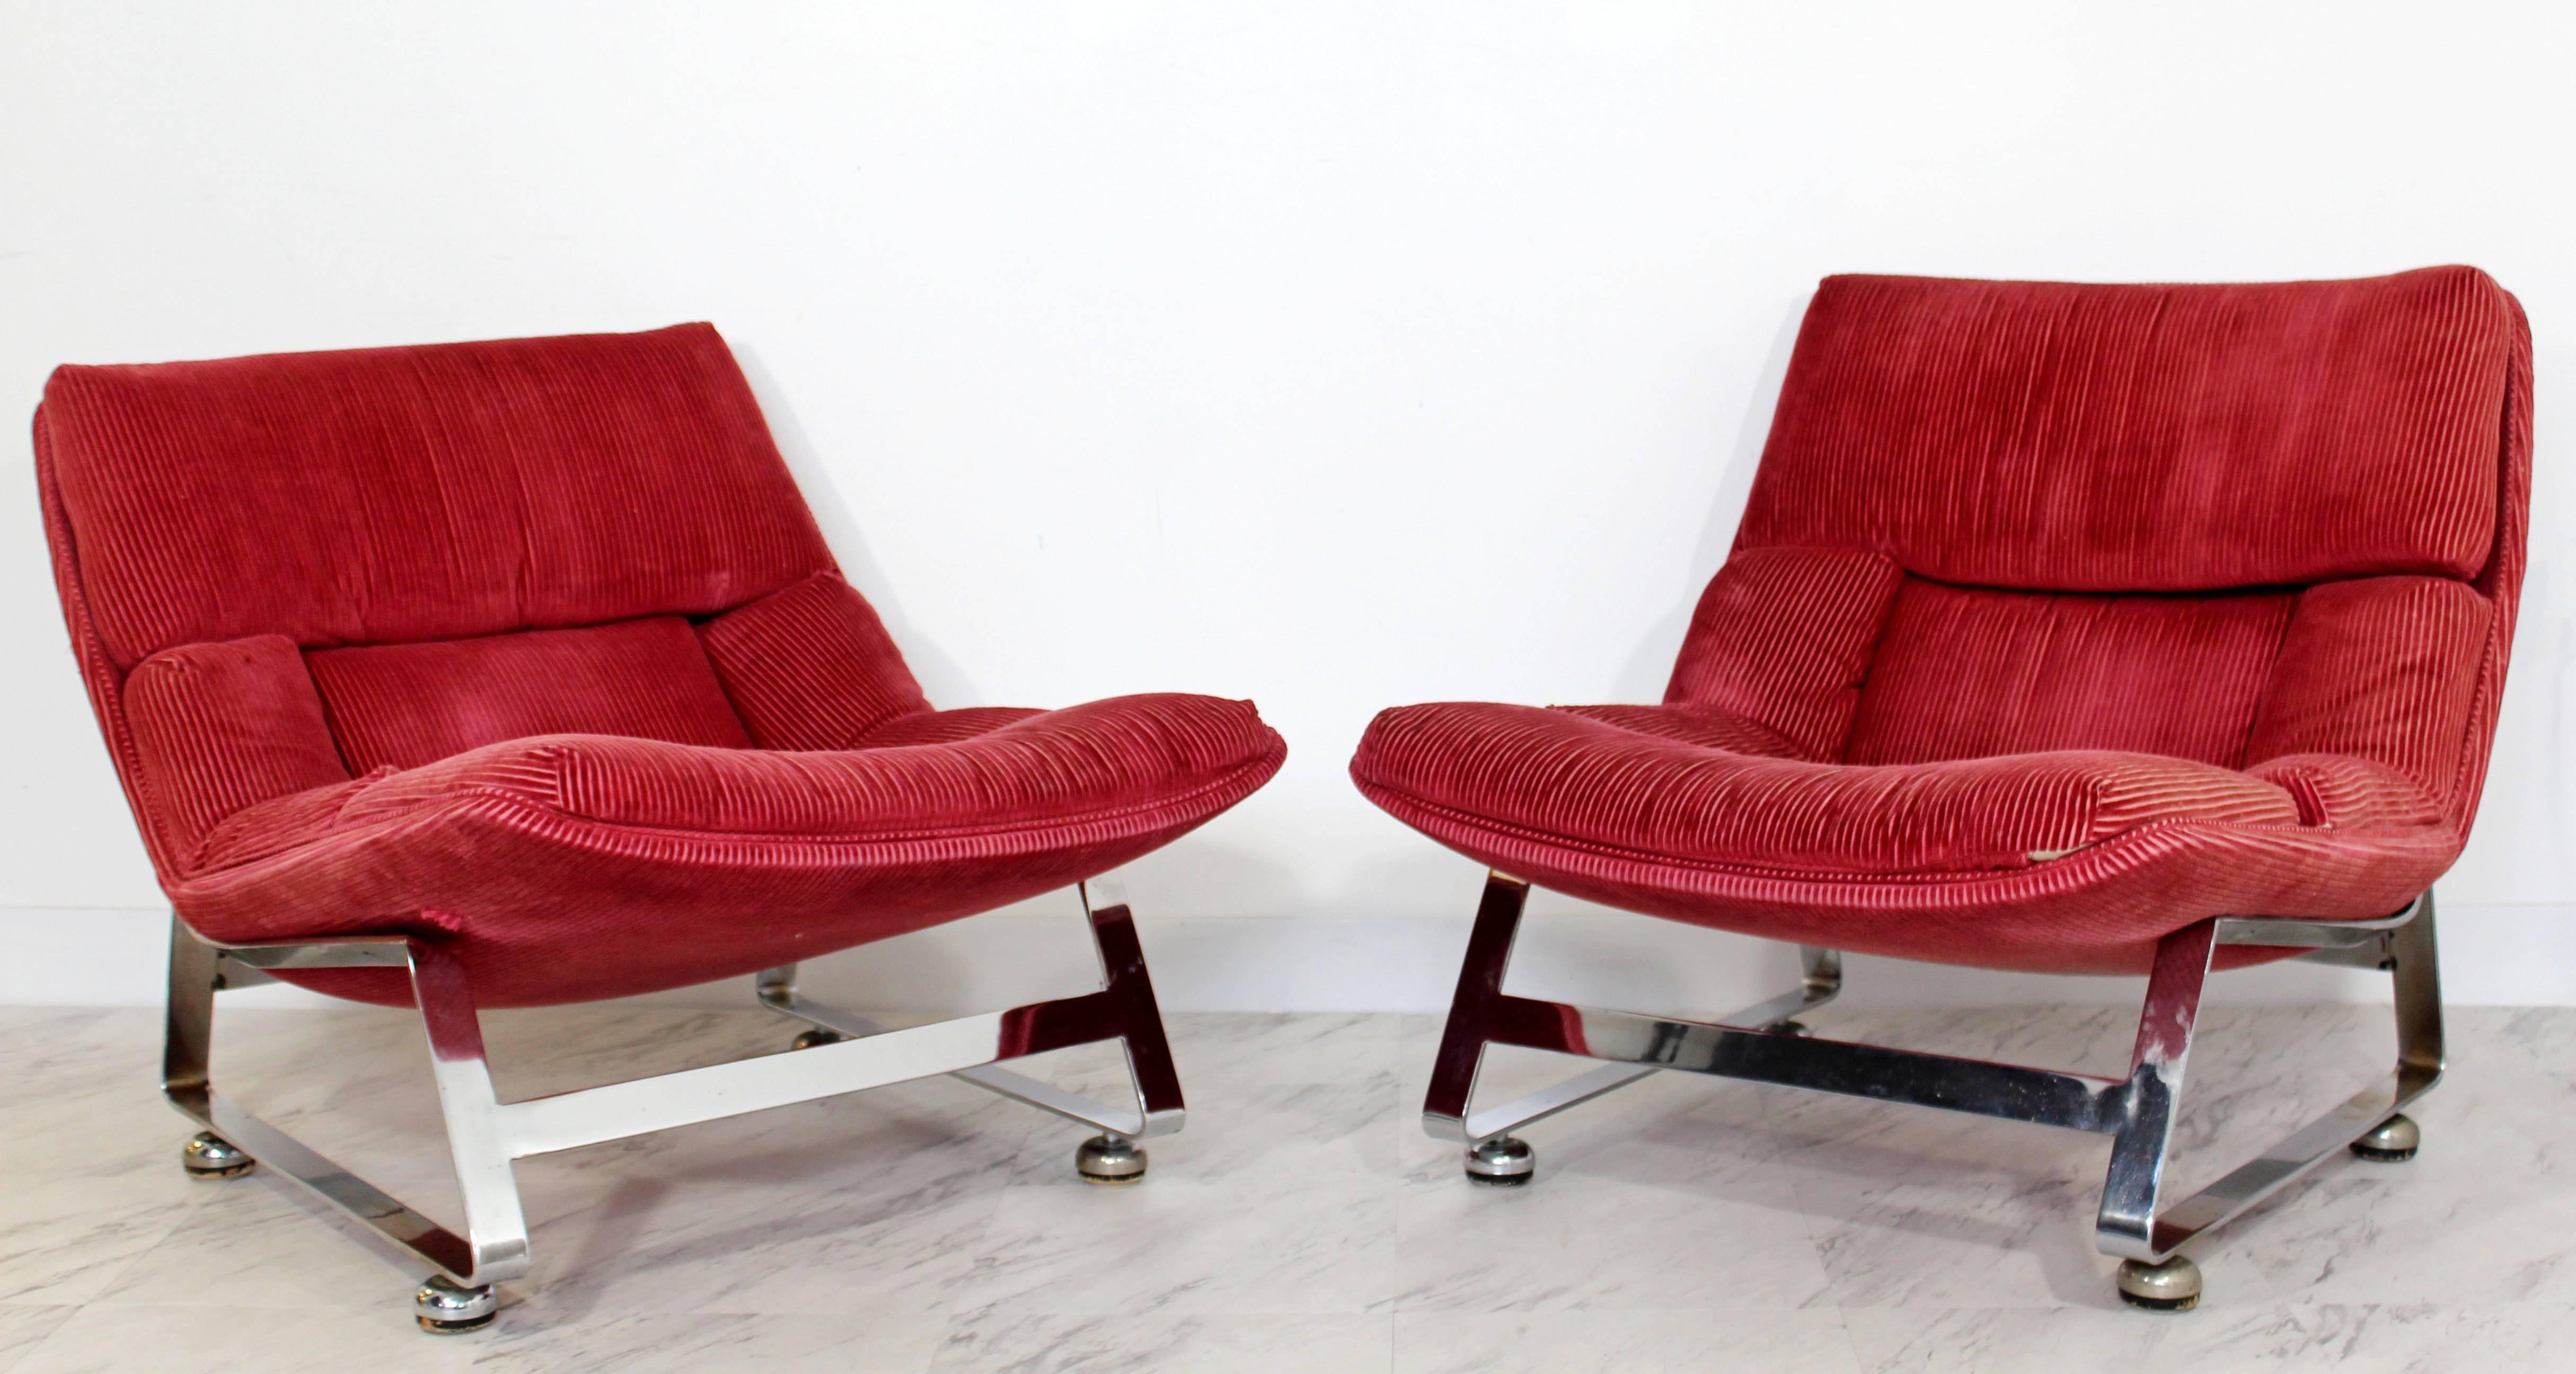 For your consideration is a fabulous, pair of lounge chairs, made of chrome. Attributed to either Baughman or Brueton. In good condition. The dimensions are 26.5